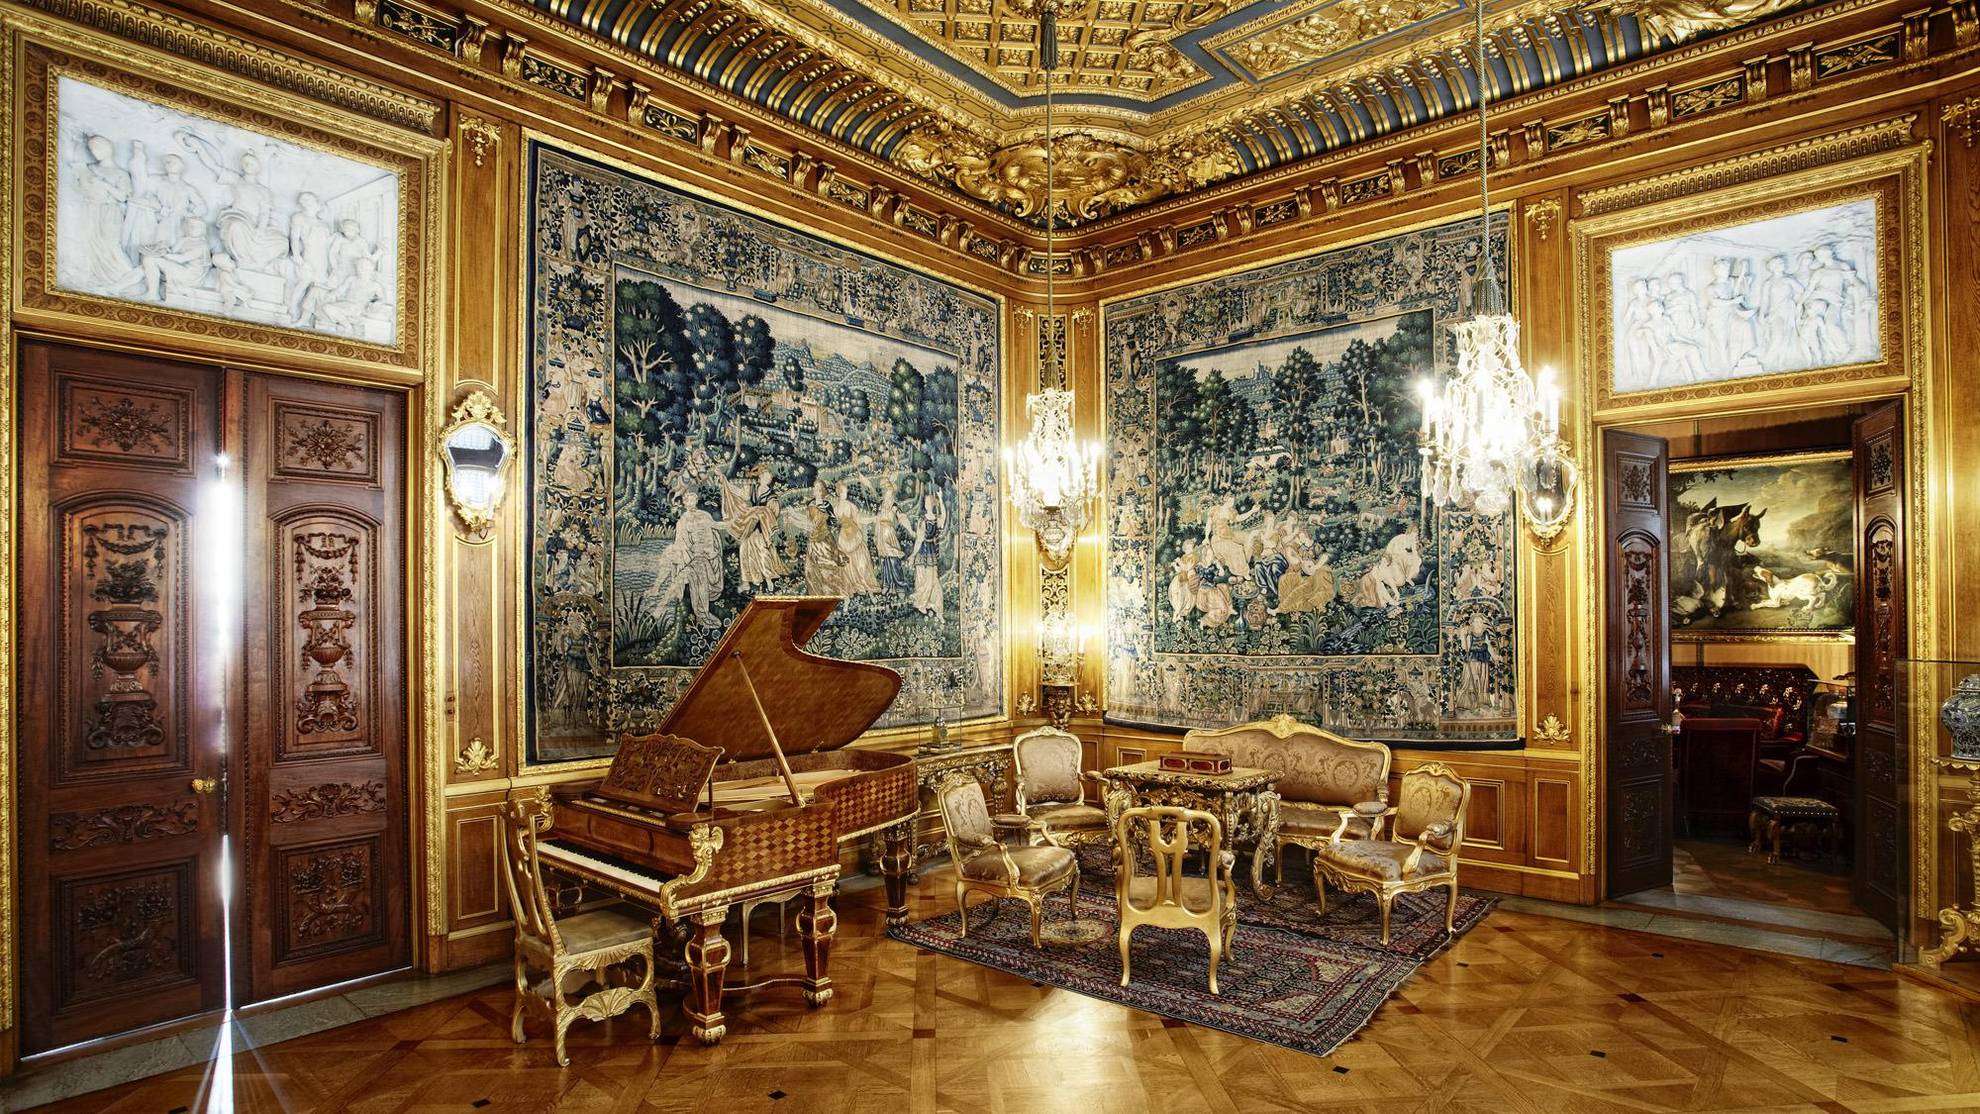 The luxurious, golden sitting room of Hallwyl house, with large paintings, a grand piano, golden furniture and chandeliers.